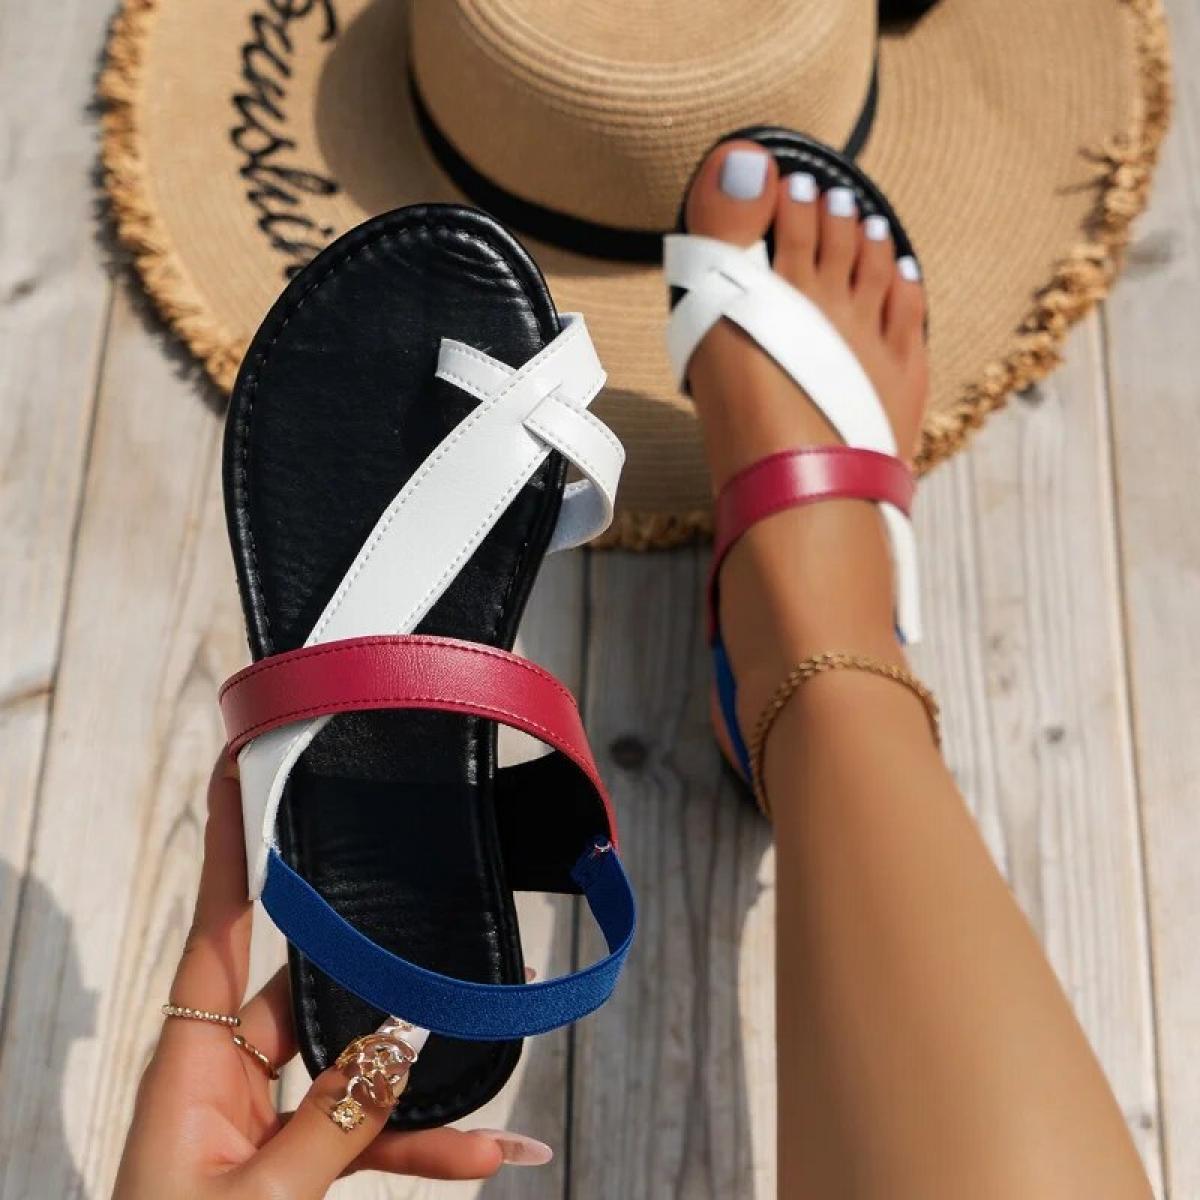 Thong Sandals 2023 Hot Sale Summer Fashionable Women's Sandals Comfortable Flat Bottomed Casual Beach Shoes Size 43 Wome